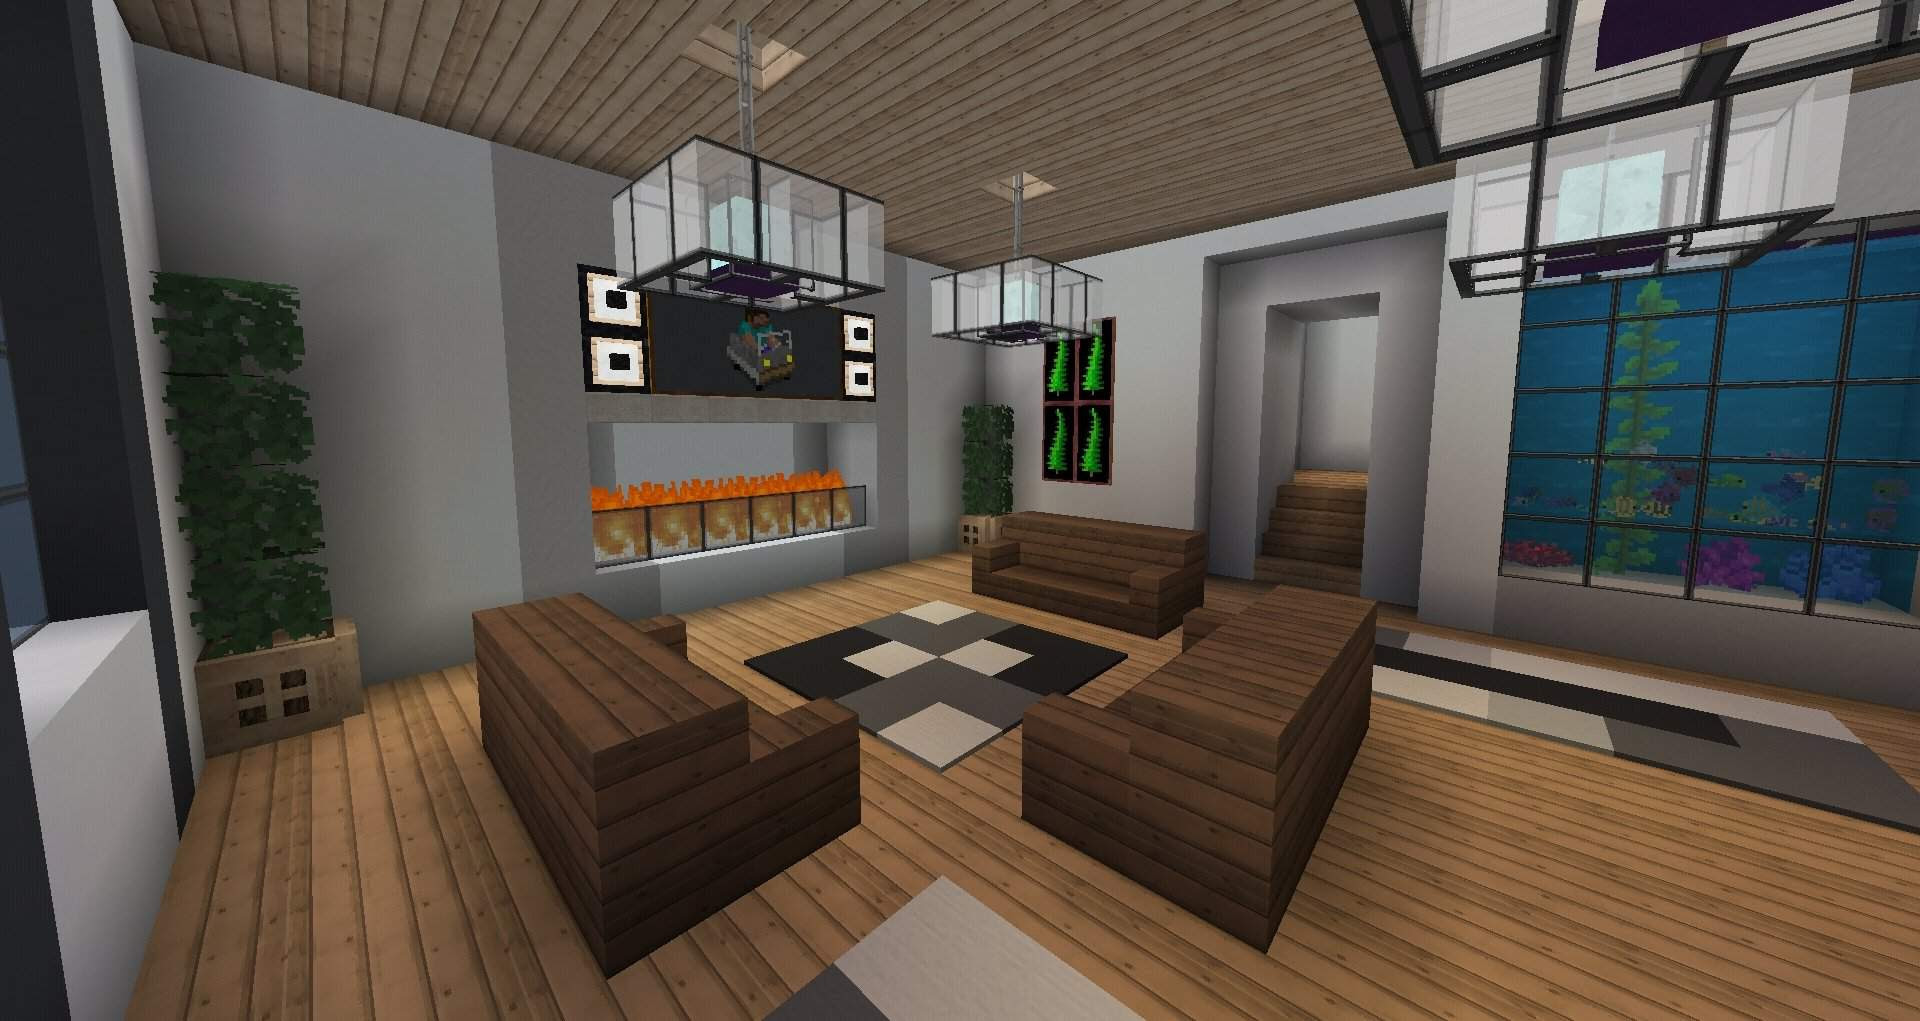 Home Architec Ideas Bedroom Minecraft Modern House Interior Design Even if you don't post your own creations, we appreciate feedback on ours. bedroom minecraft modern house interior